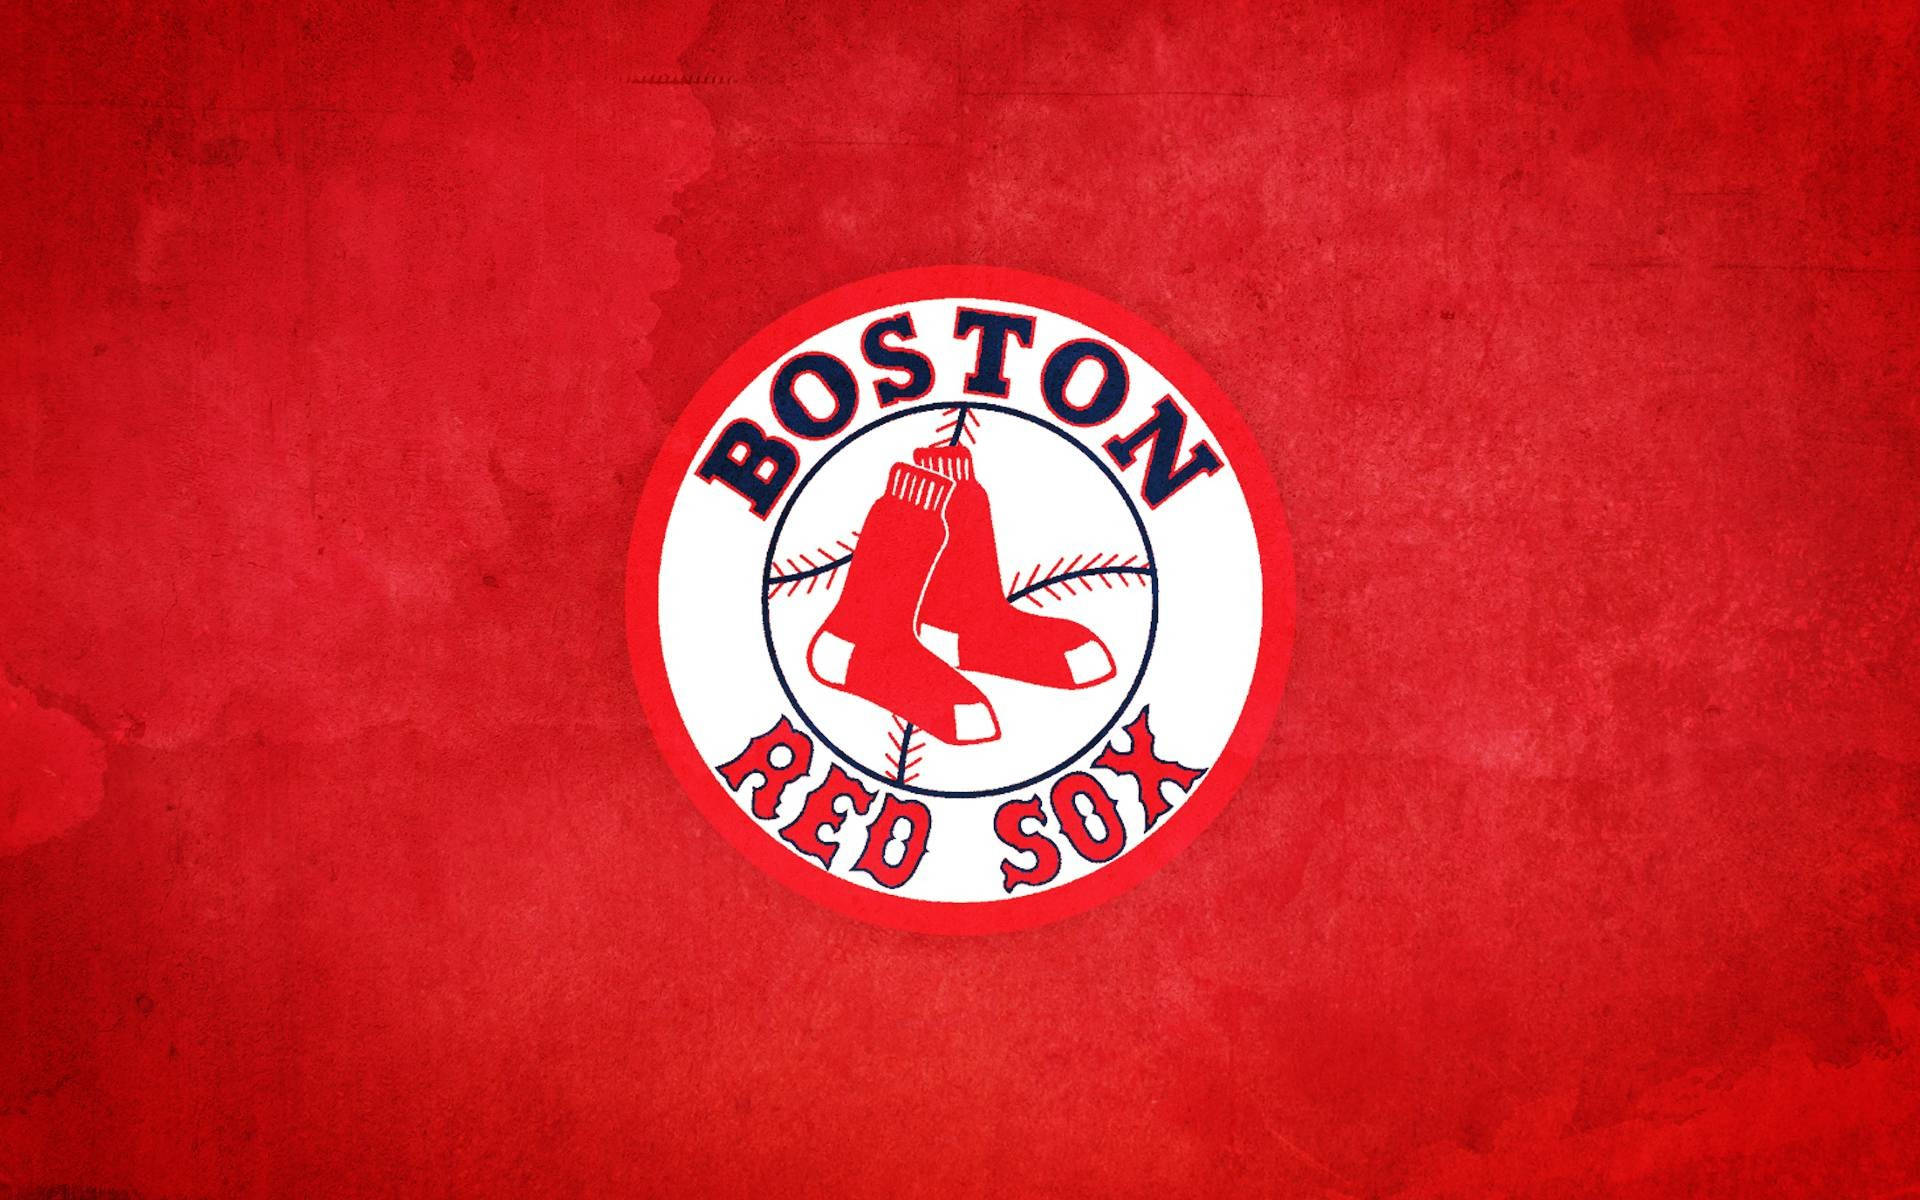 Red Sox wallpaper is here!